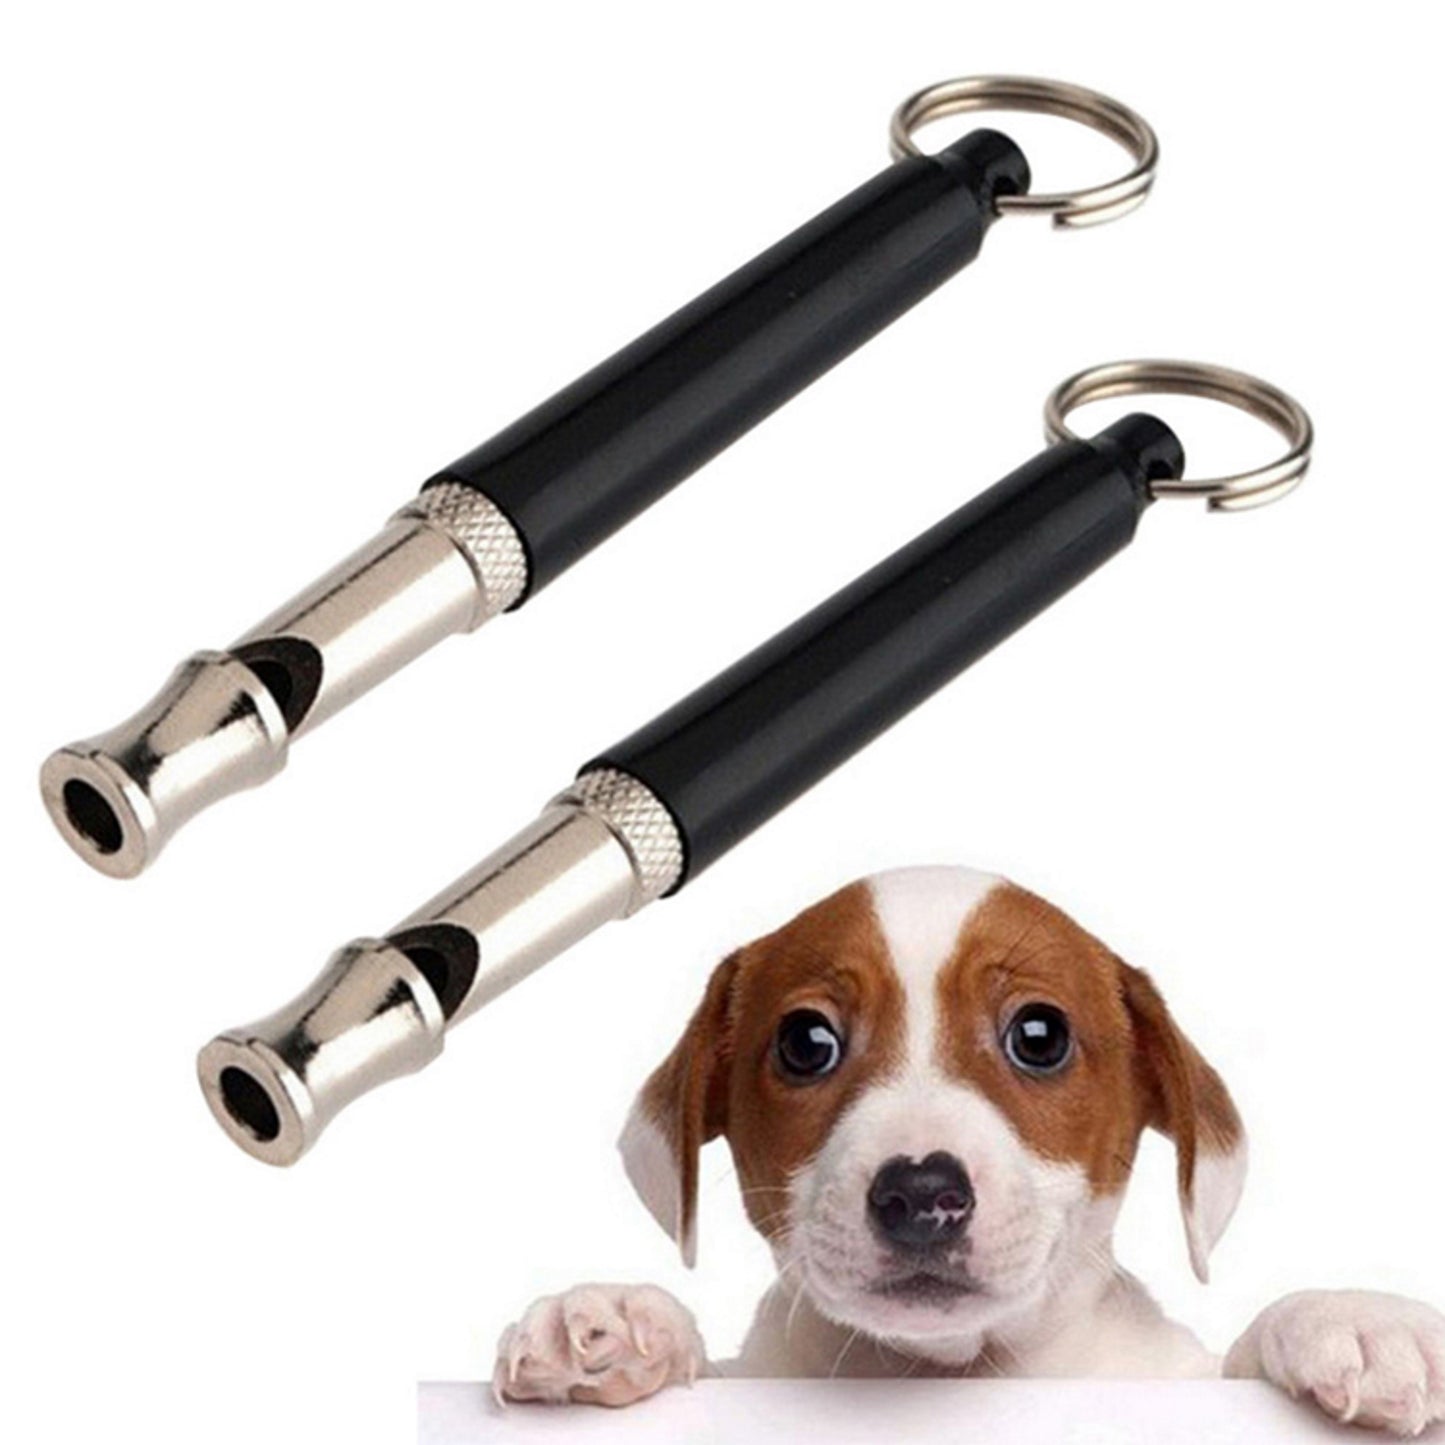 NiftyPlaza Dog Training Whistle, 2 pcs Pet Obedience, Stop Barking Ultrasonic Supersonic Sound Pitch